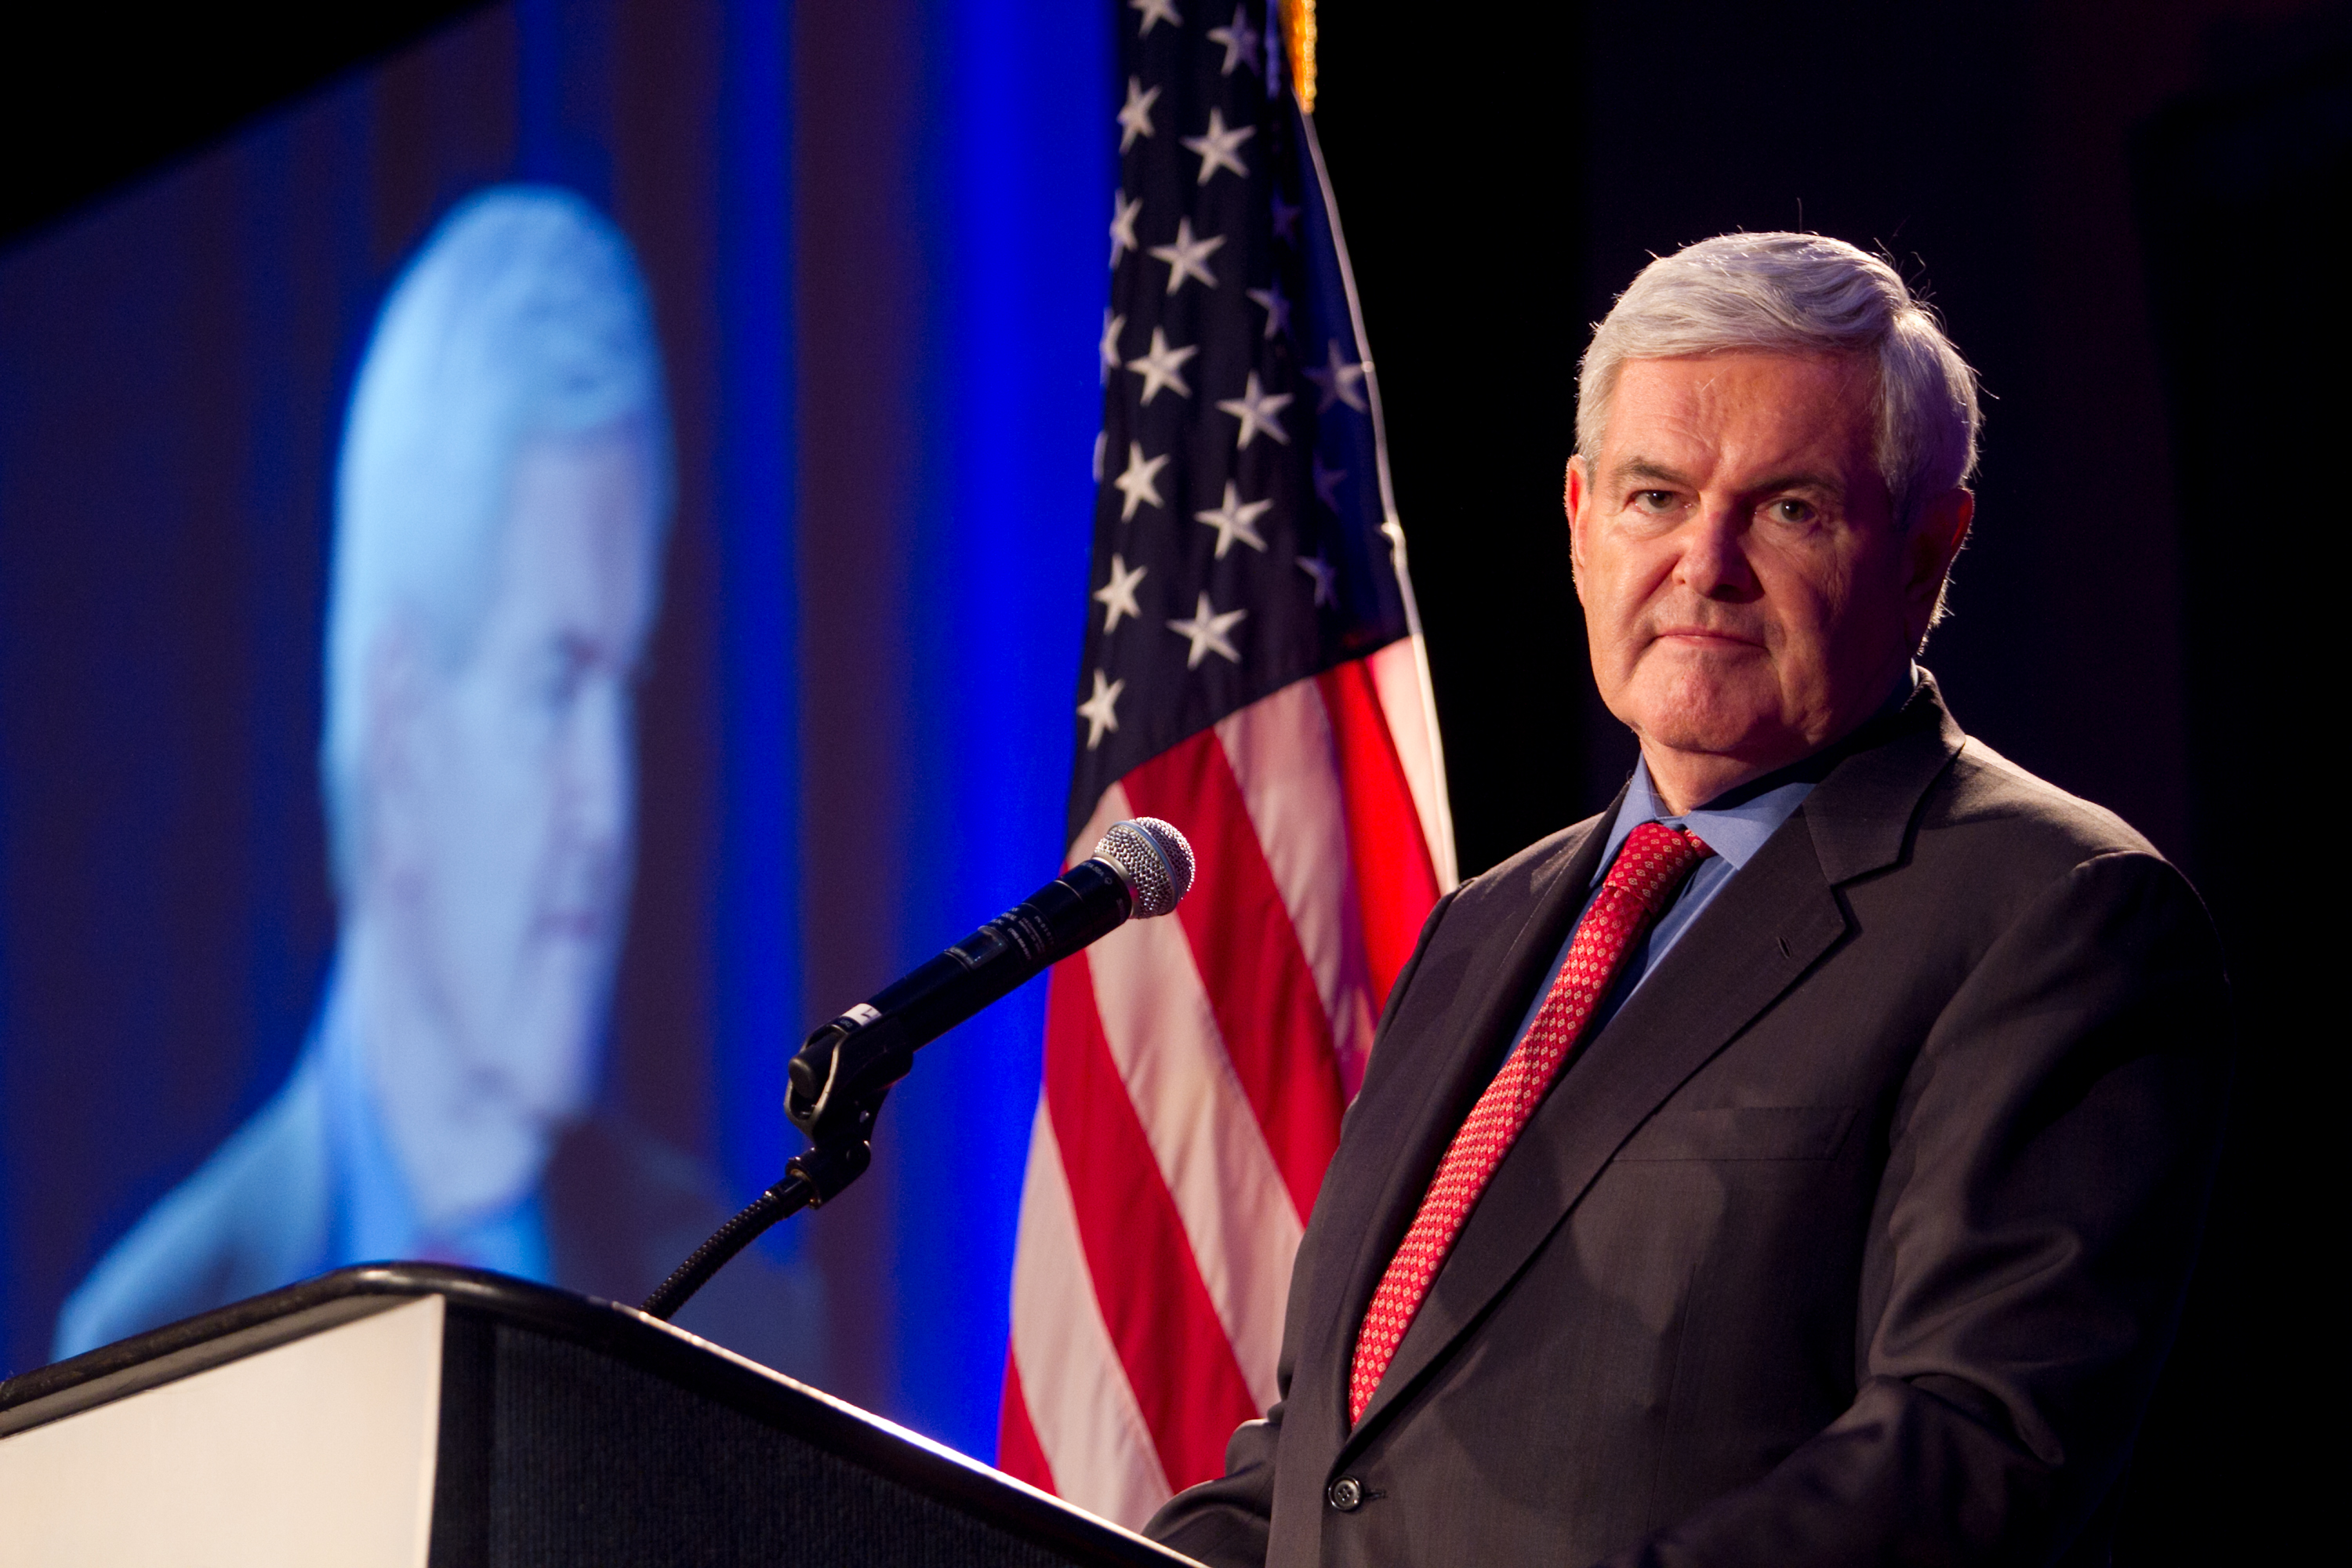 Former House Speaker Newt Gingrich gives the keynote address during the Georgia Republican Party Victory Dinner in Macon, Georgia, on May 13, 2011.